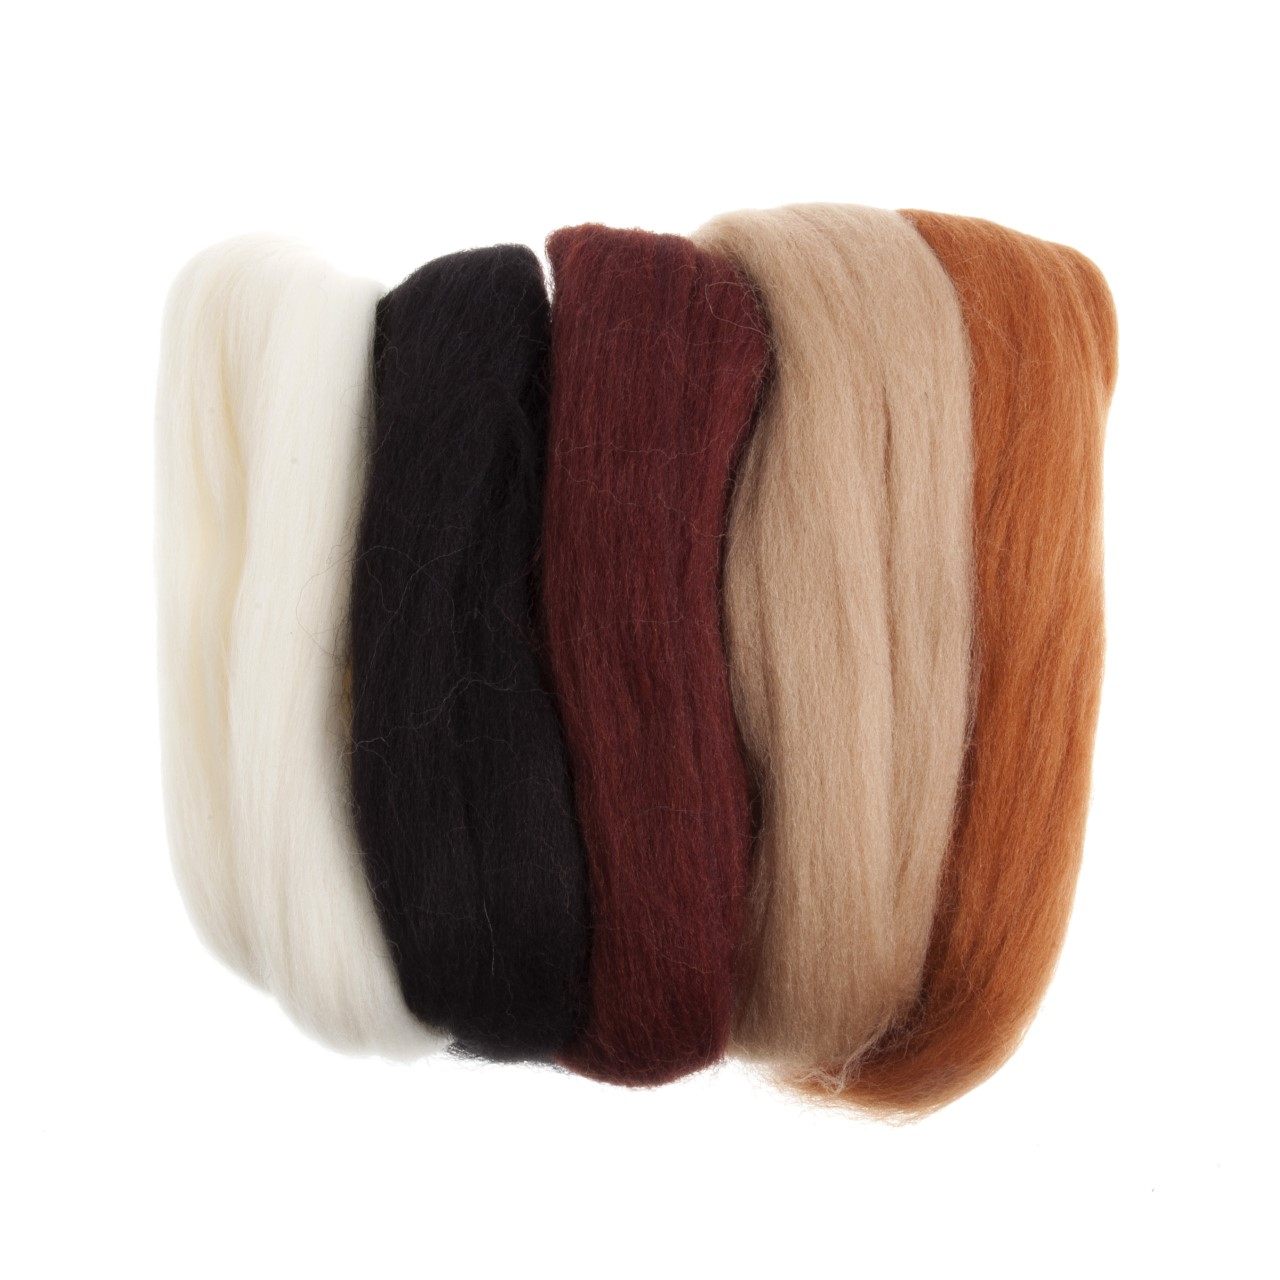 Natural Wool Roving: 50g: Assorted Browns